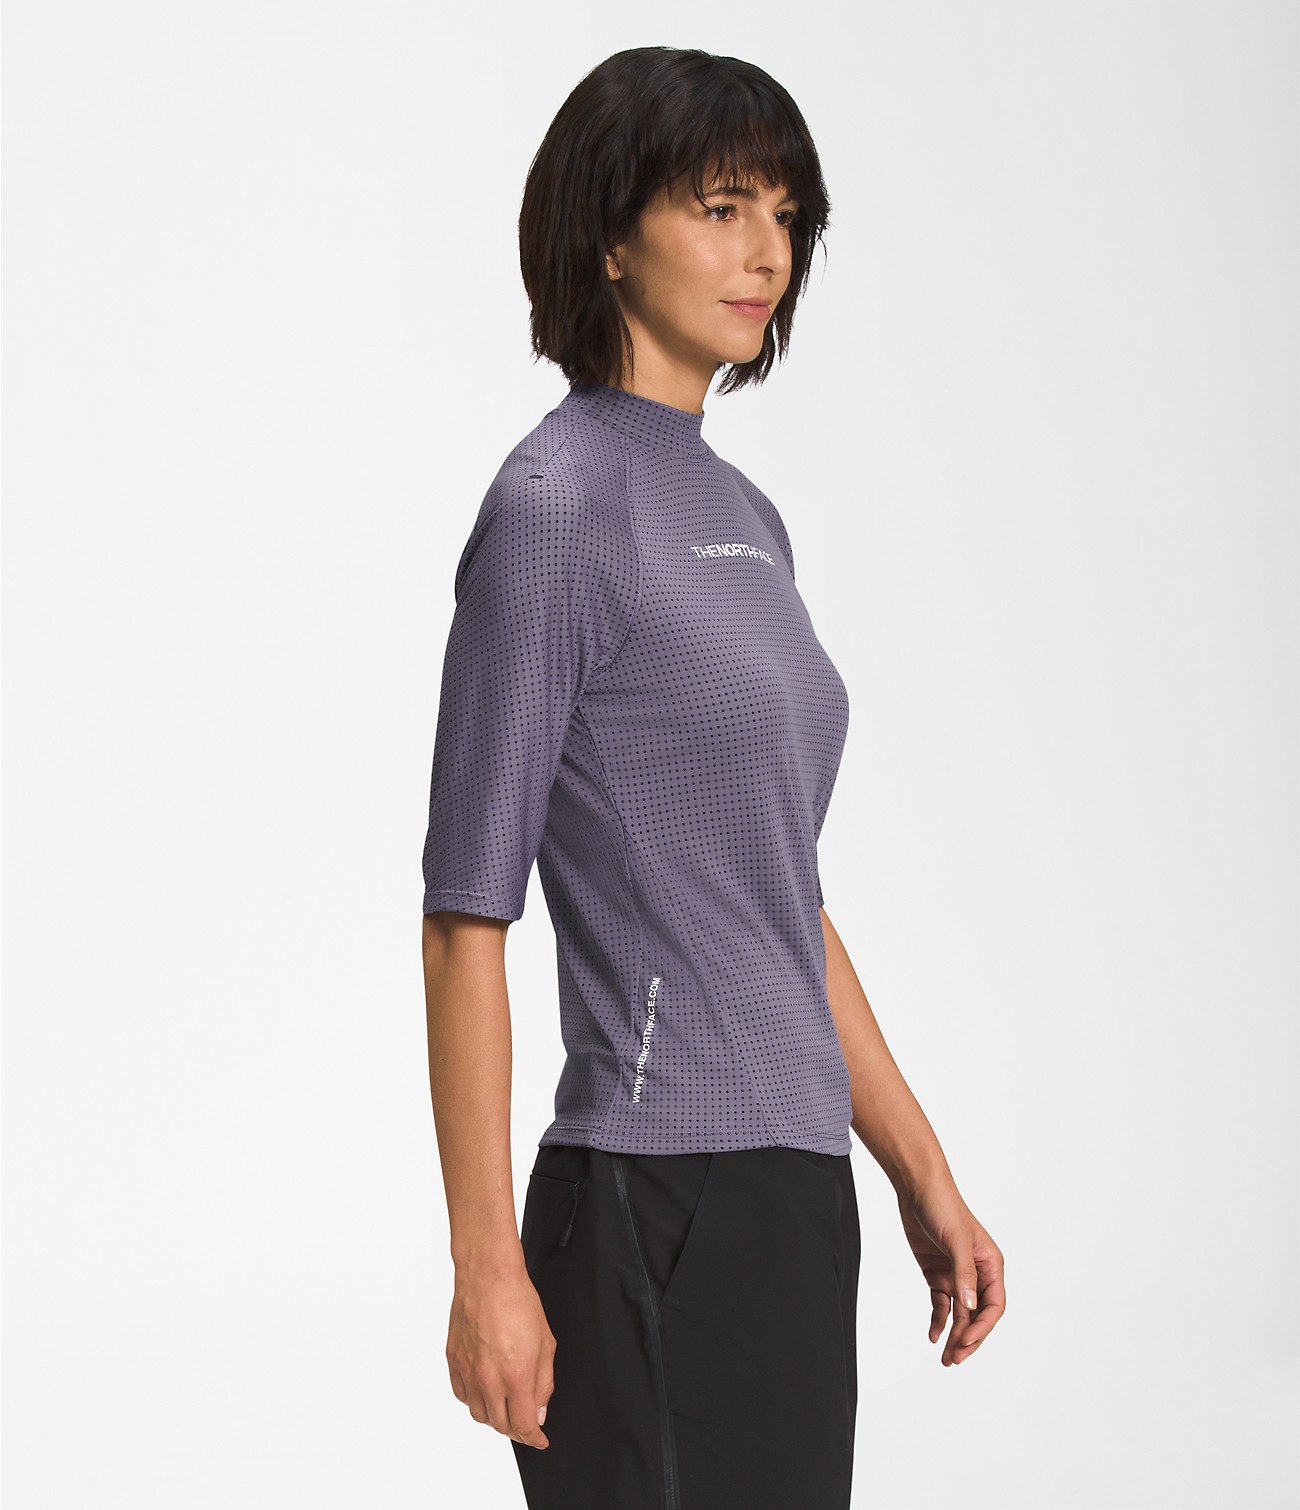 Women’s RMST DotKnit Short-Sleeve Top | The North Face